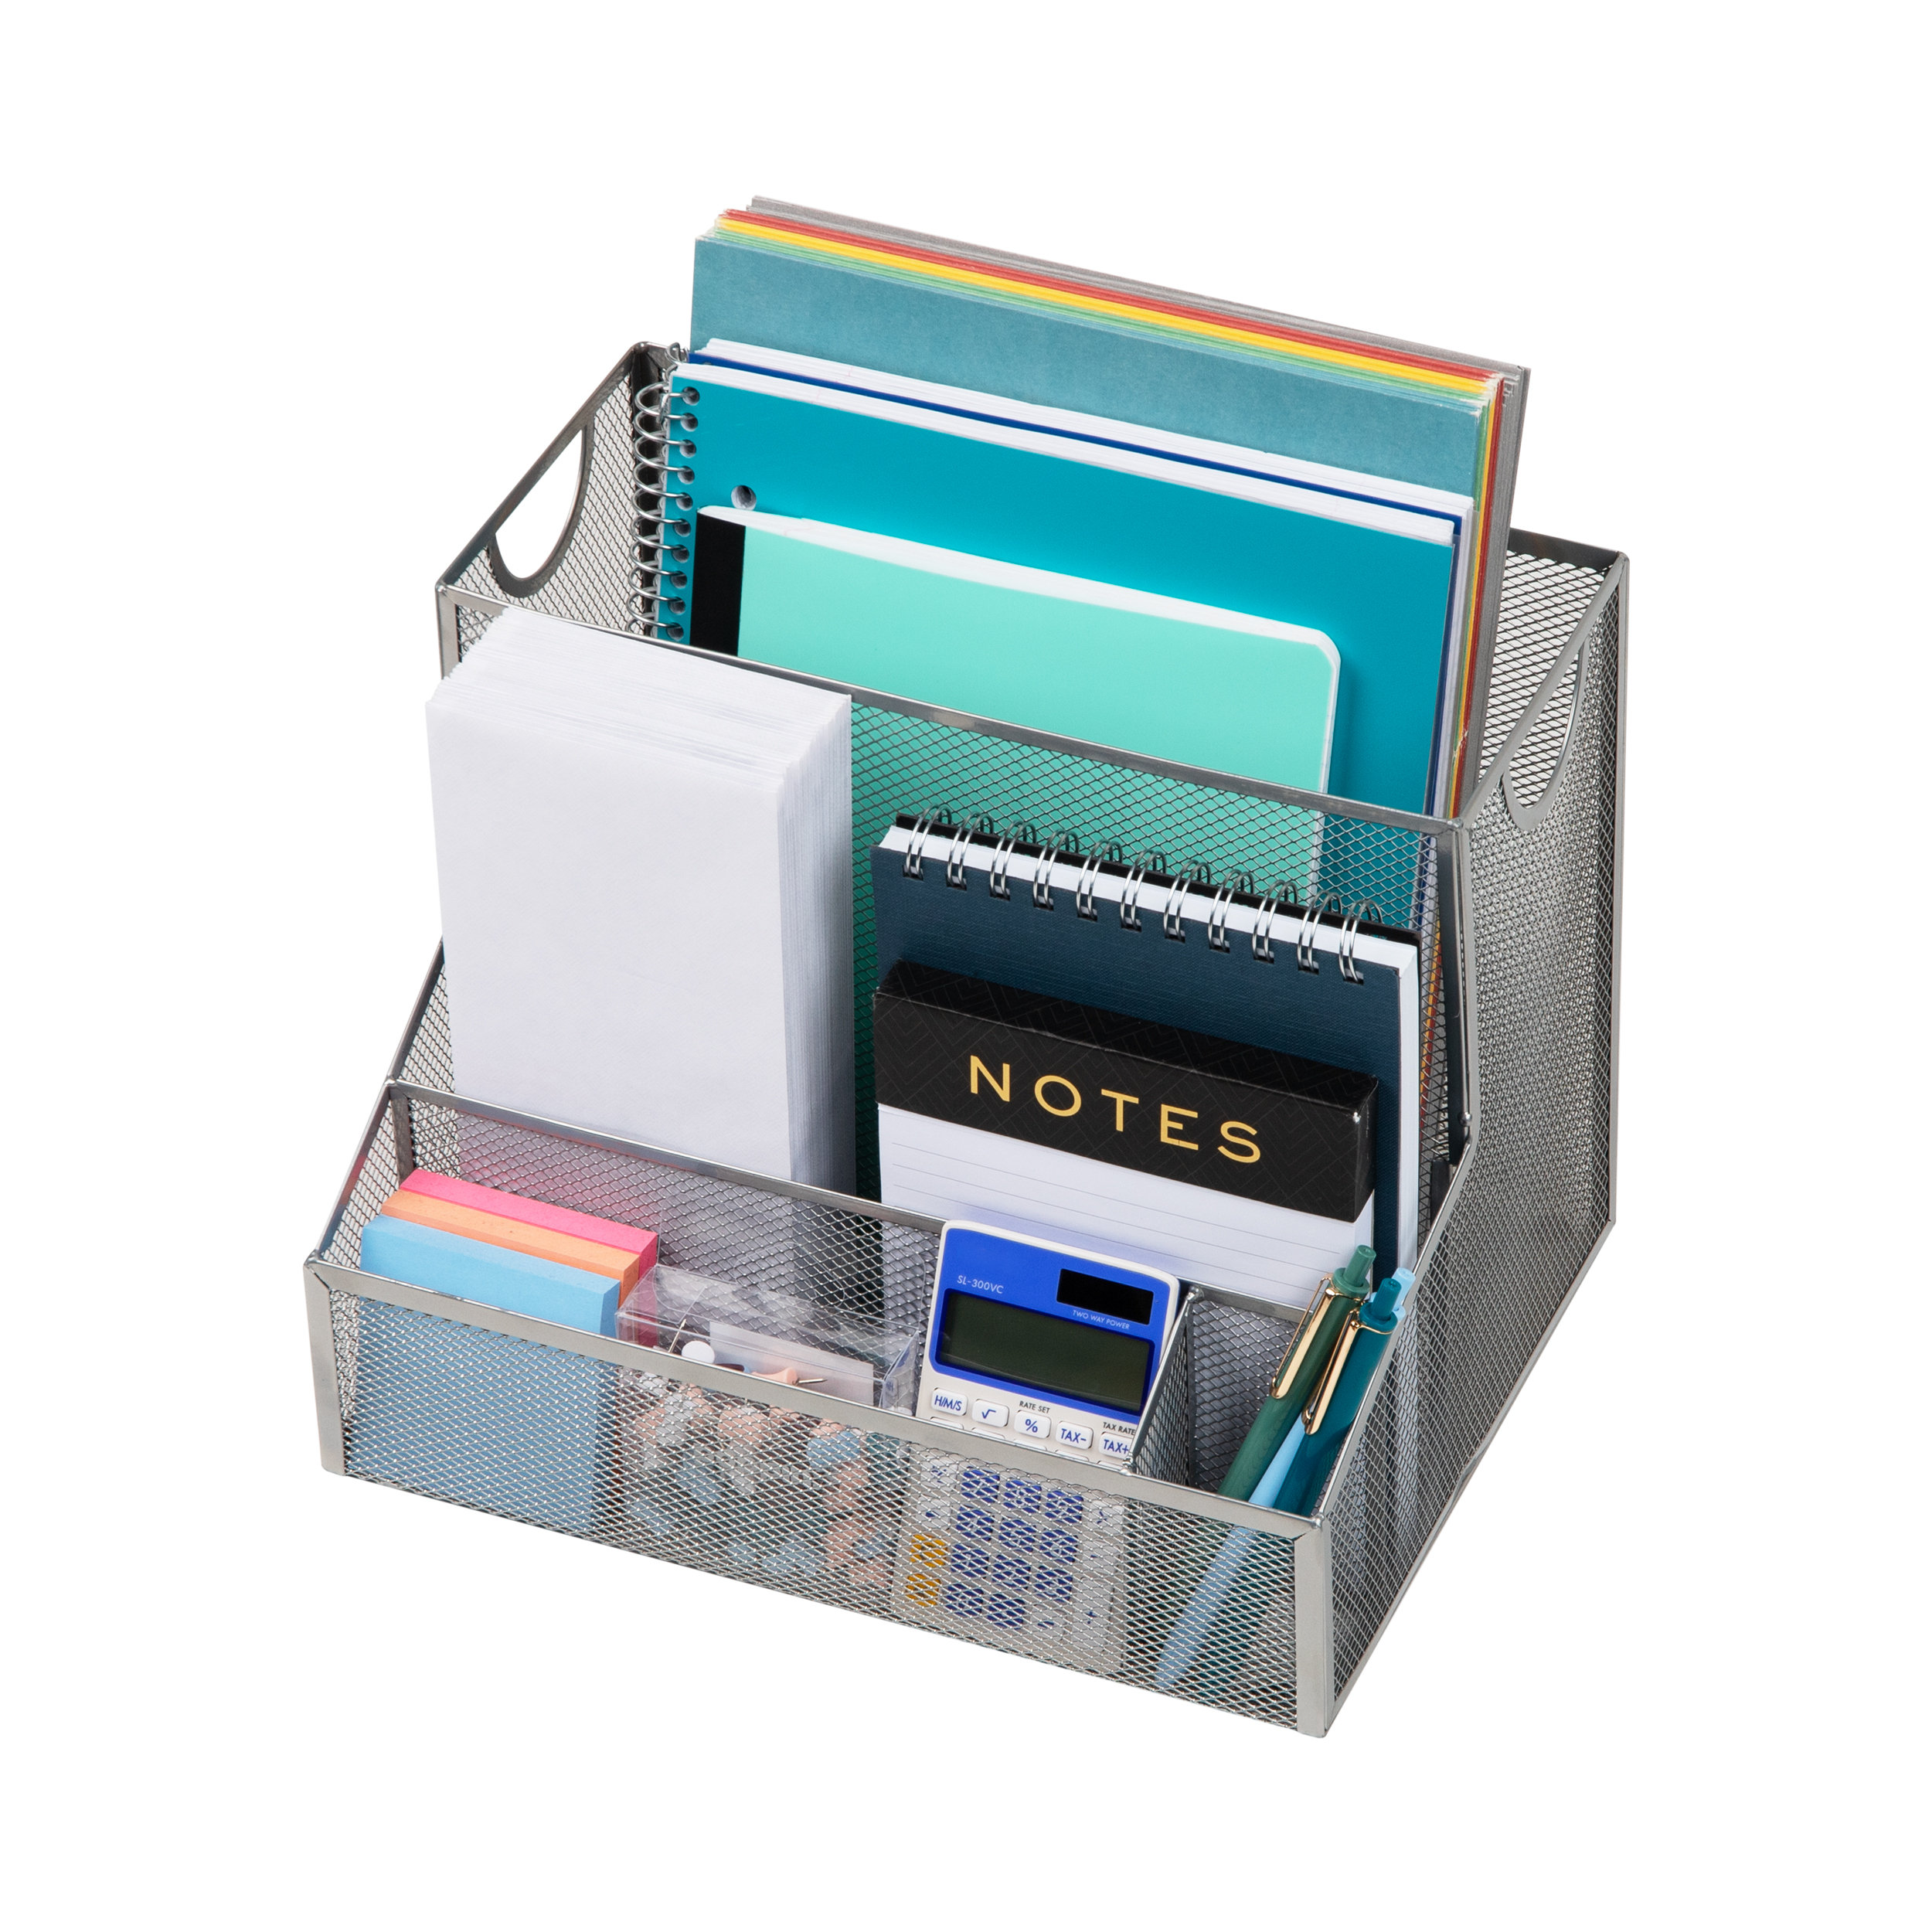 Desktop Organizer and Caddy Black - Note Tower